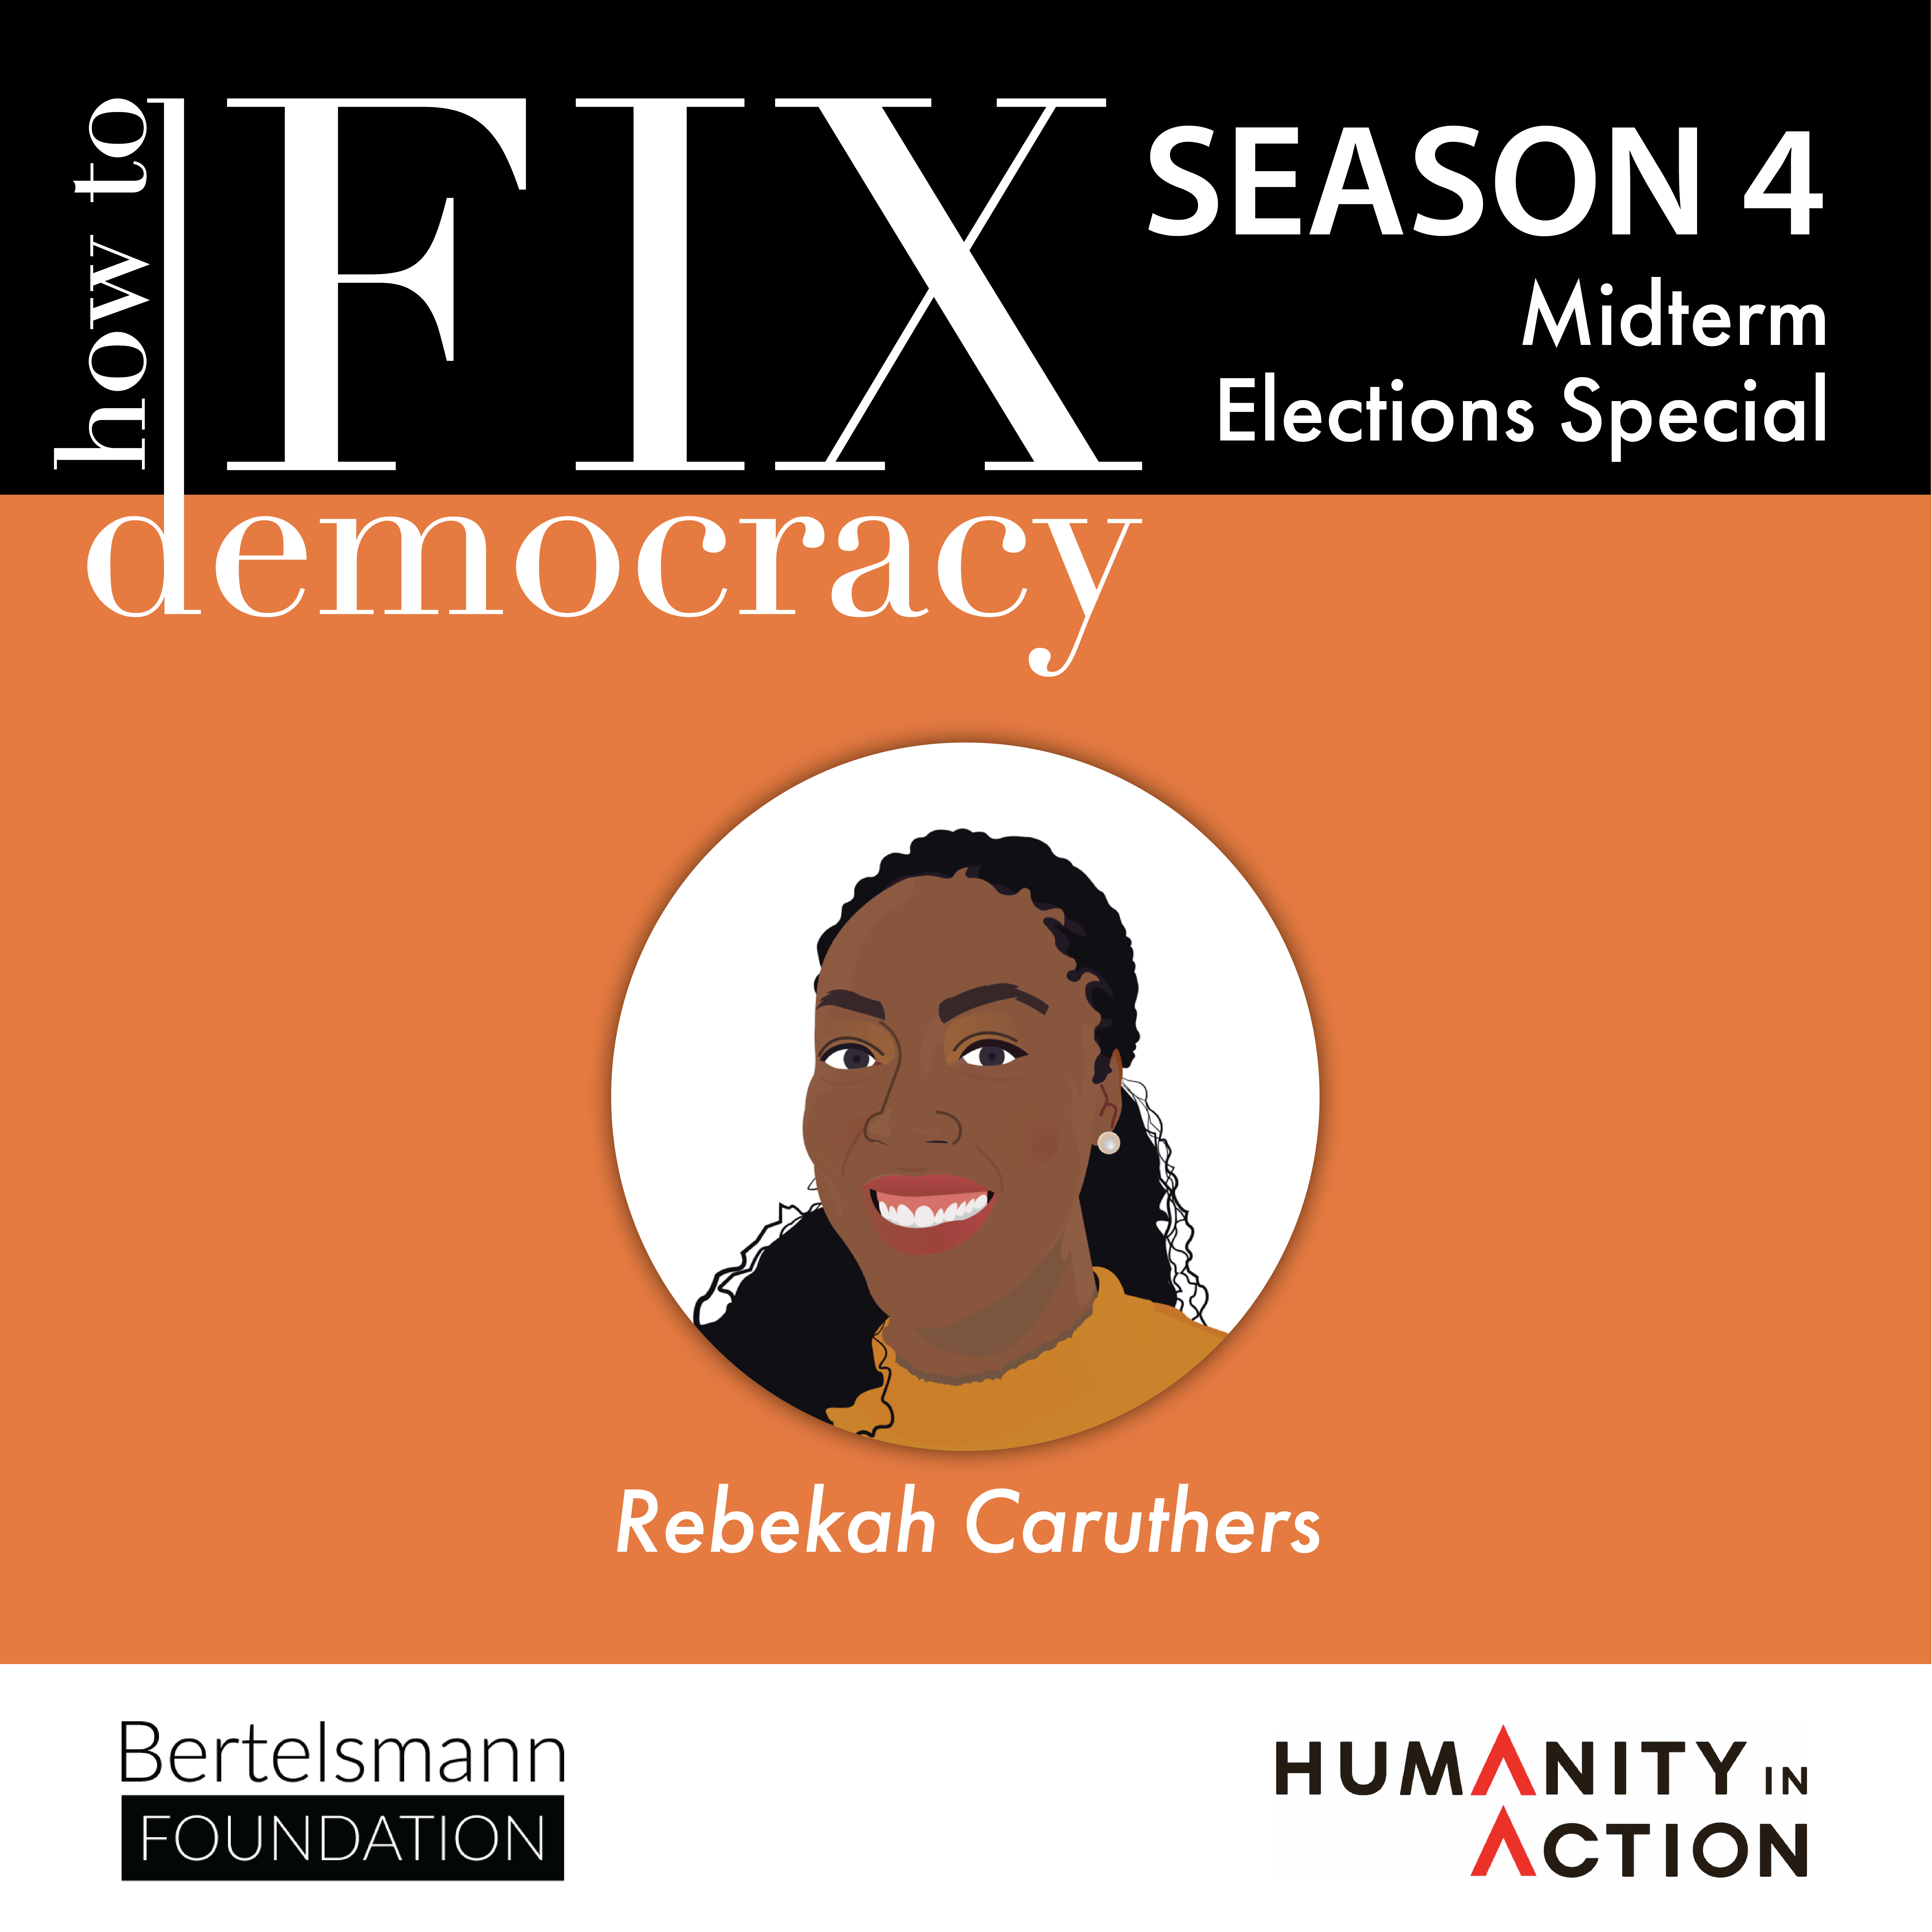 Season 4, Midterm Elections Special | Rebekah Caruthers | 